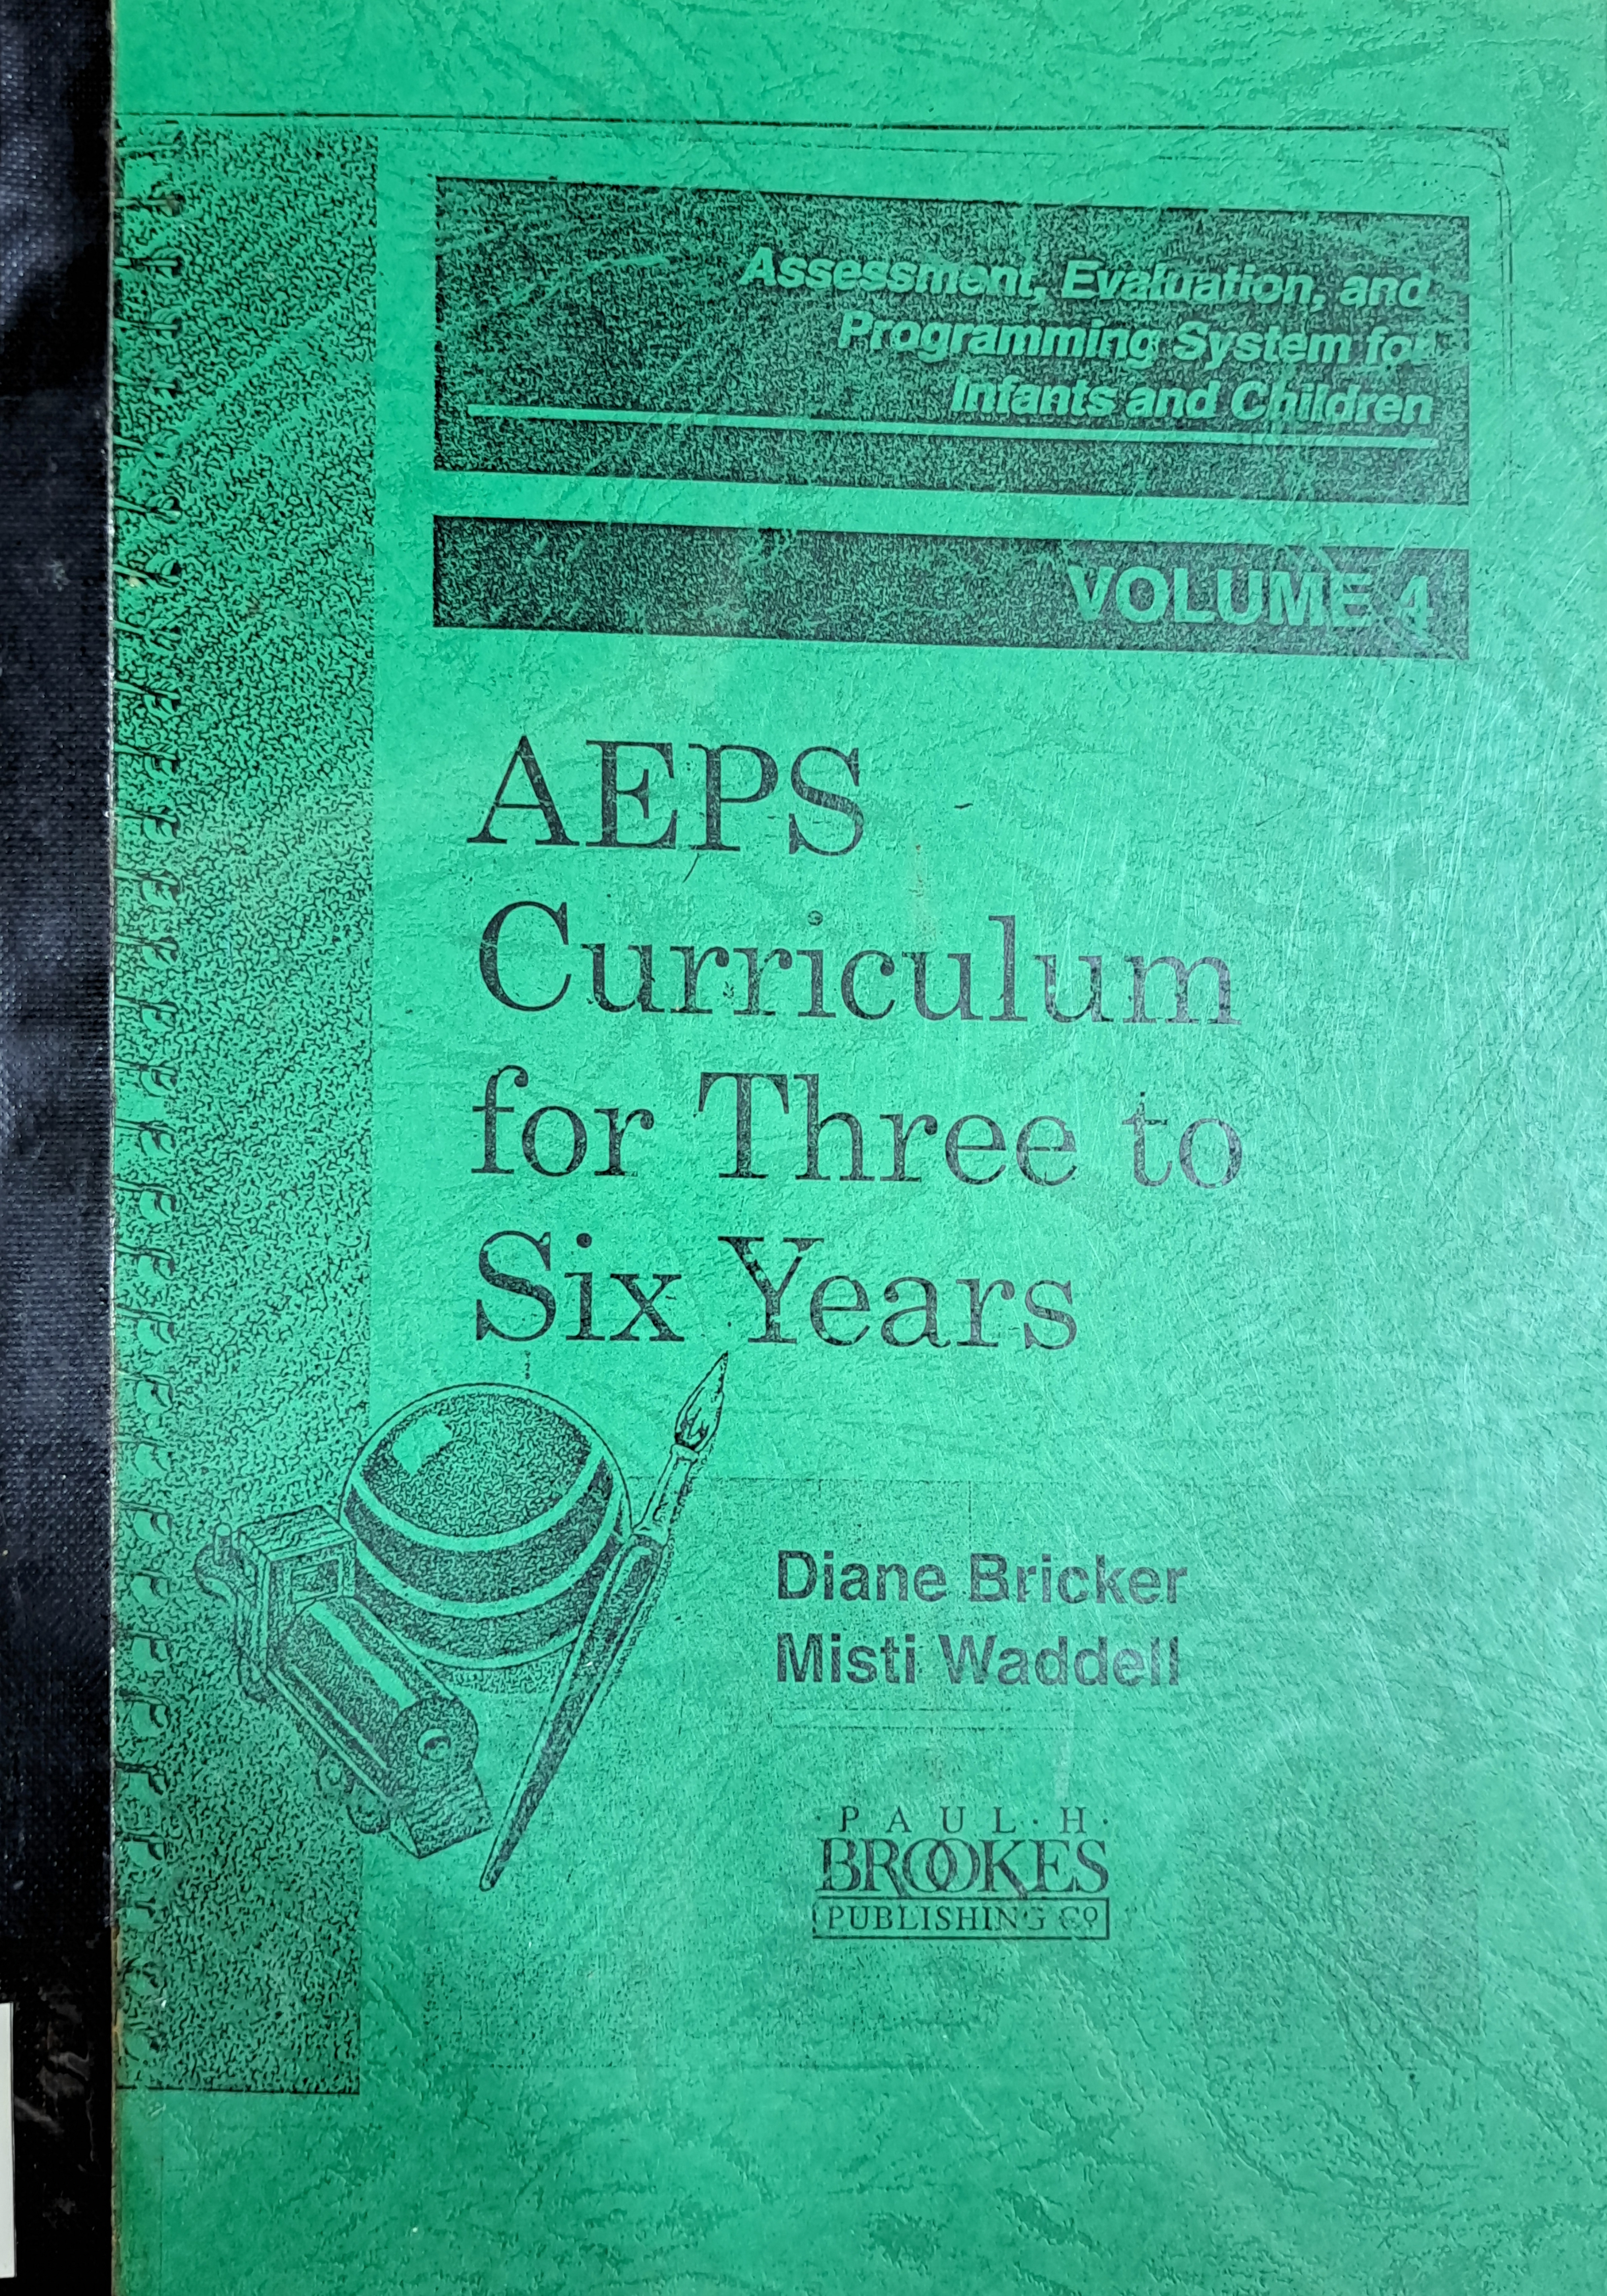 Cover image for AEPS Curiculum For Three to Six Years Vol. 4 : Assessment, Evaluation, and Programming System for Infant and Children. bibliographic